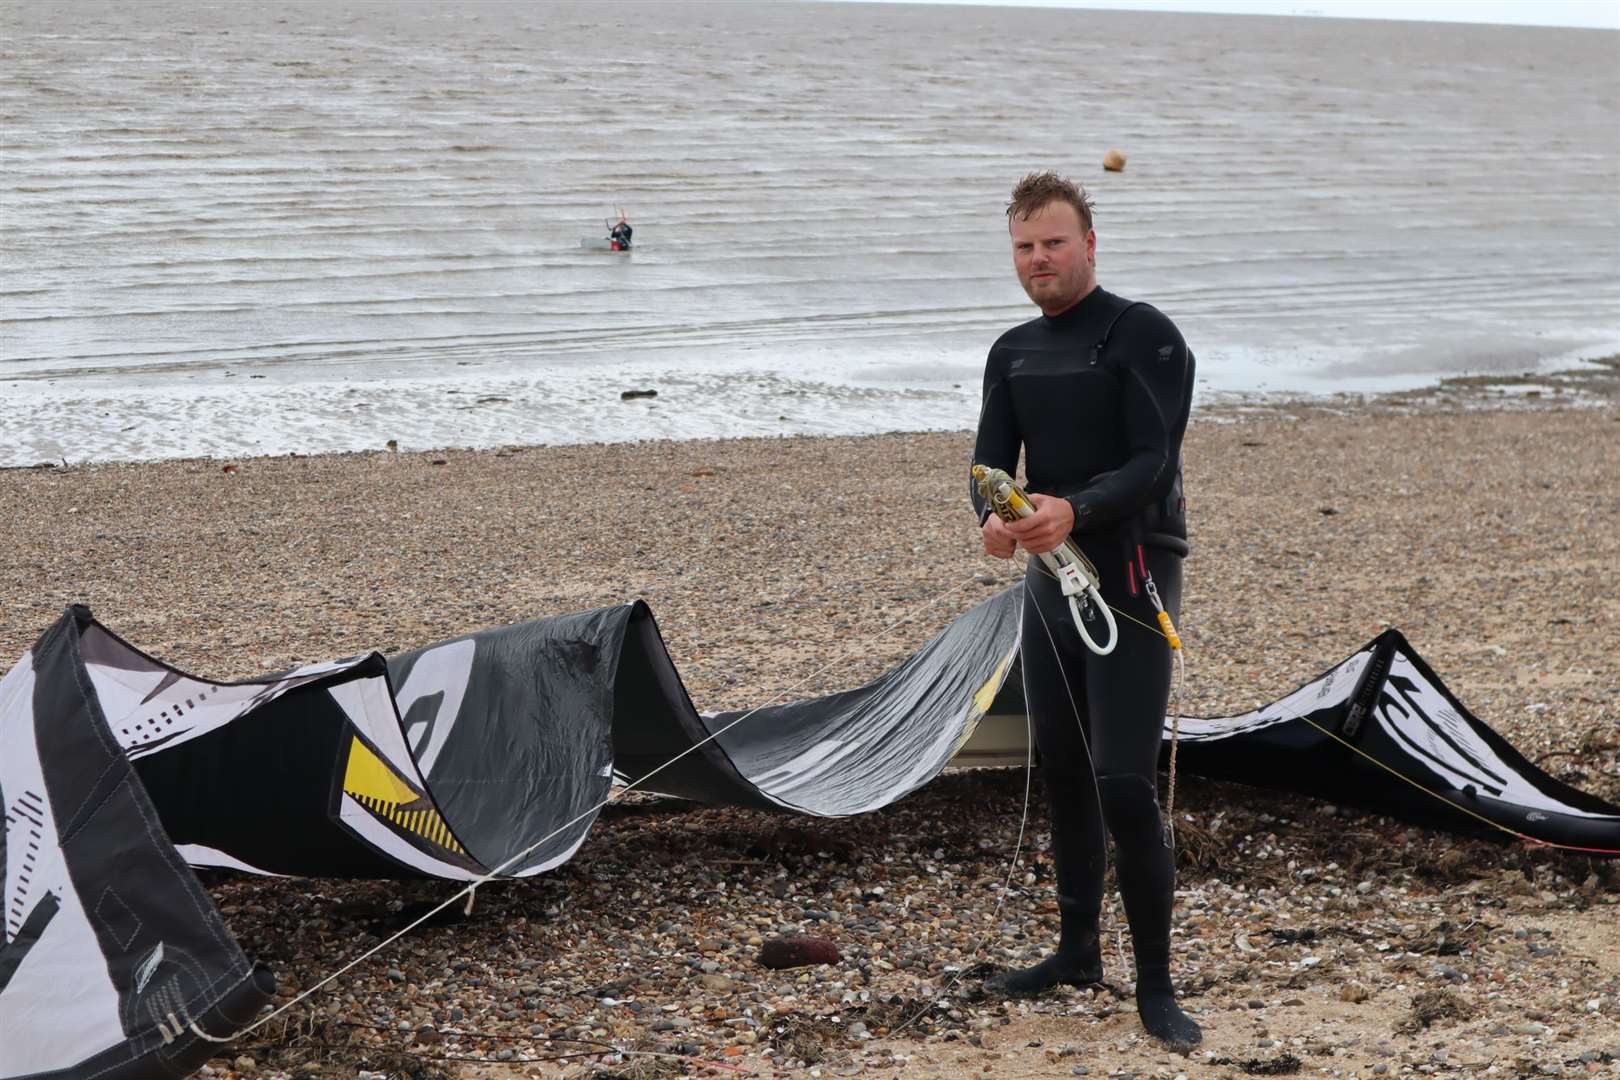 Kite surfer Wayne Sheppard from Dartford back in the water at Minster shingle bank on the Isle of Sheppey